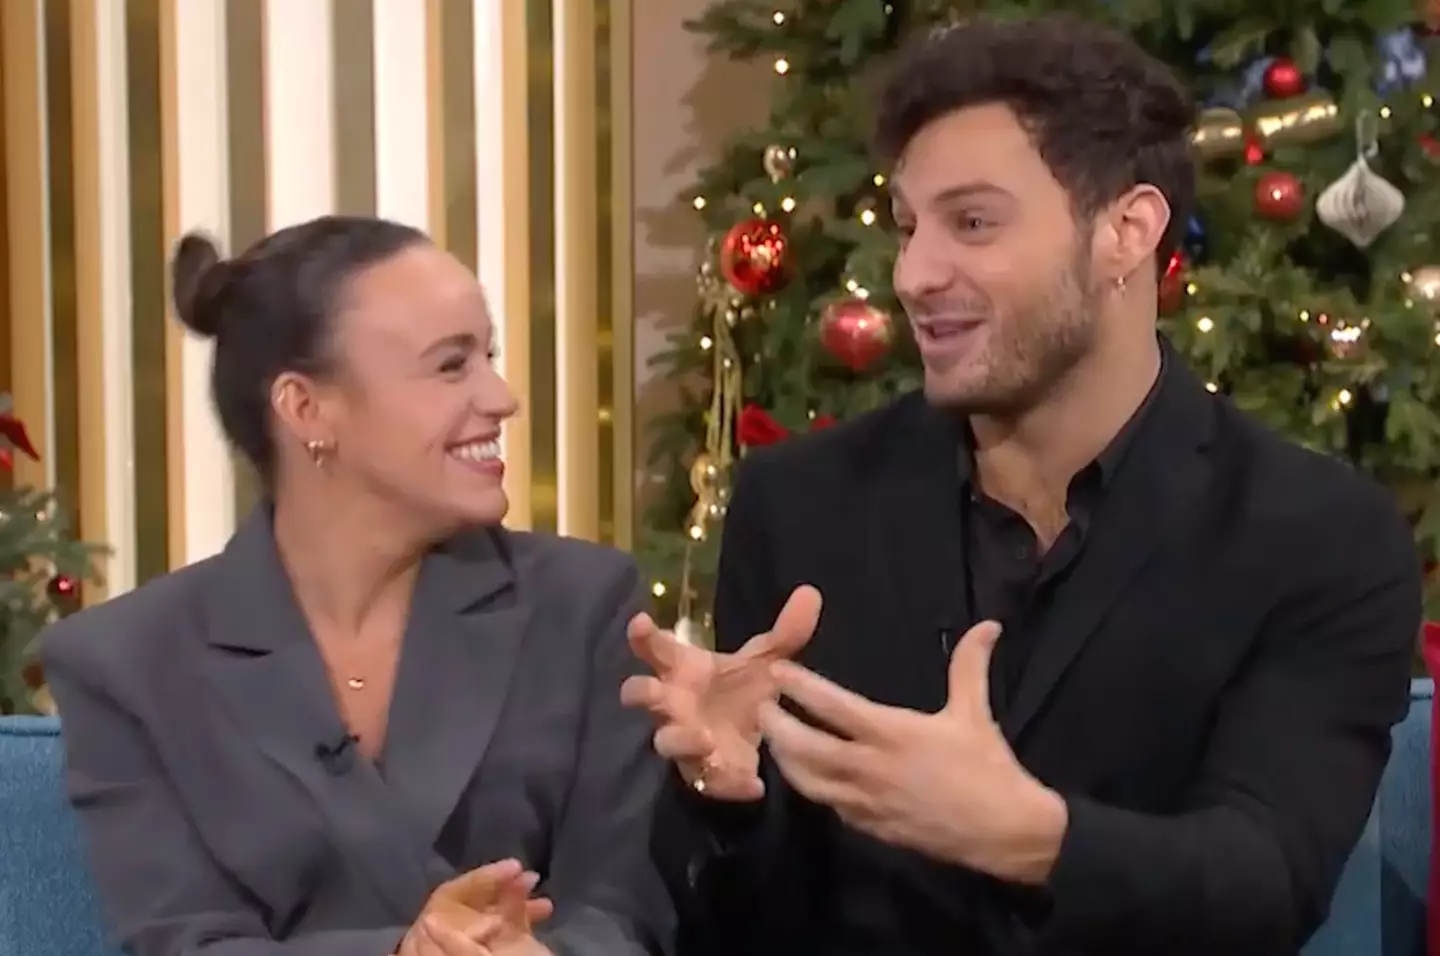 Strictly winners, Ellie Leach and Vito Coppola, addressed their 'romance' on This Morning.